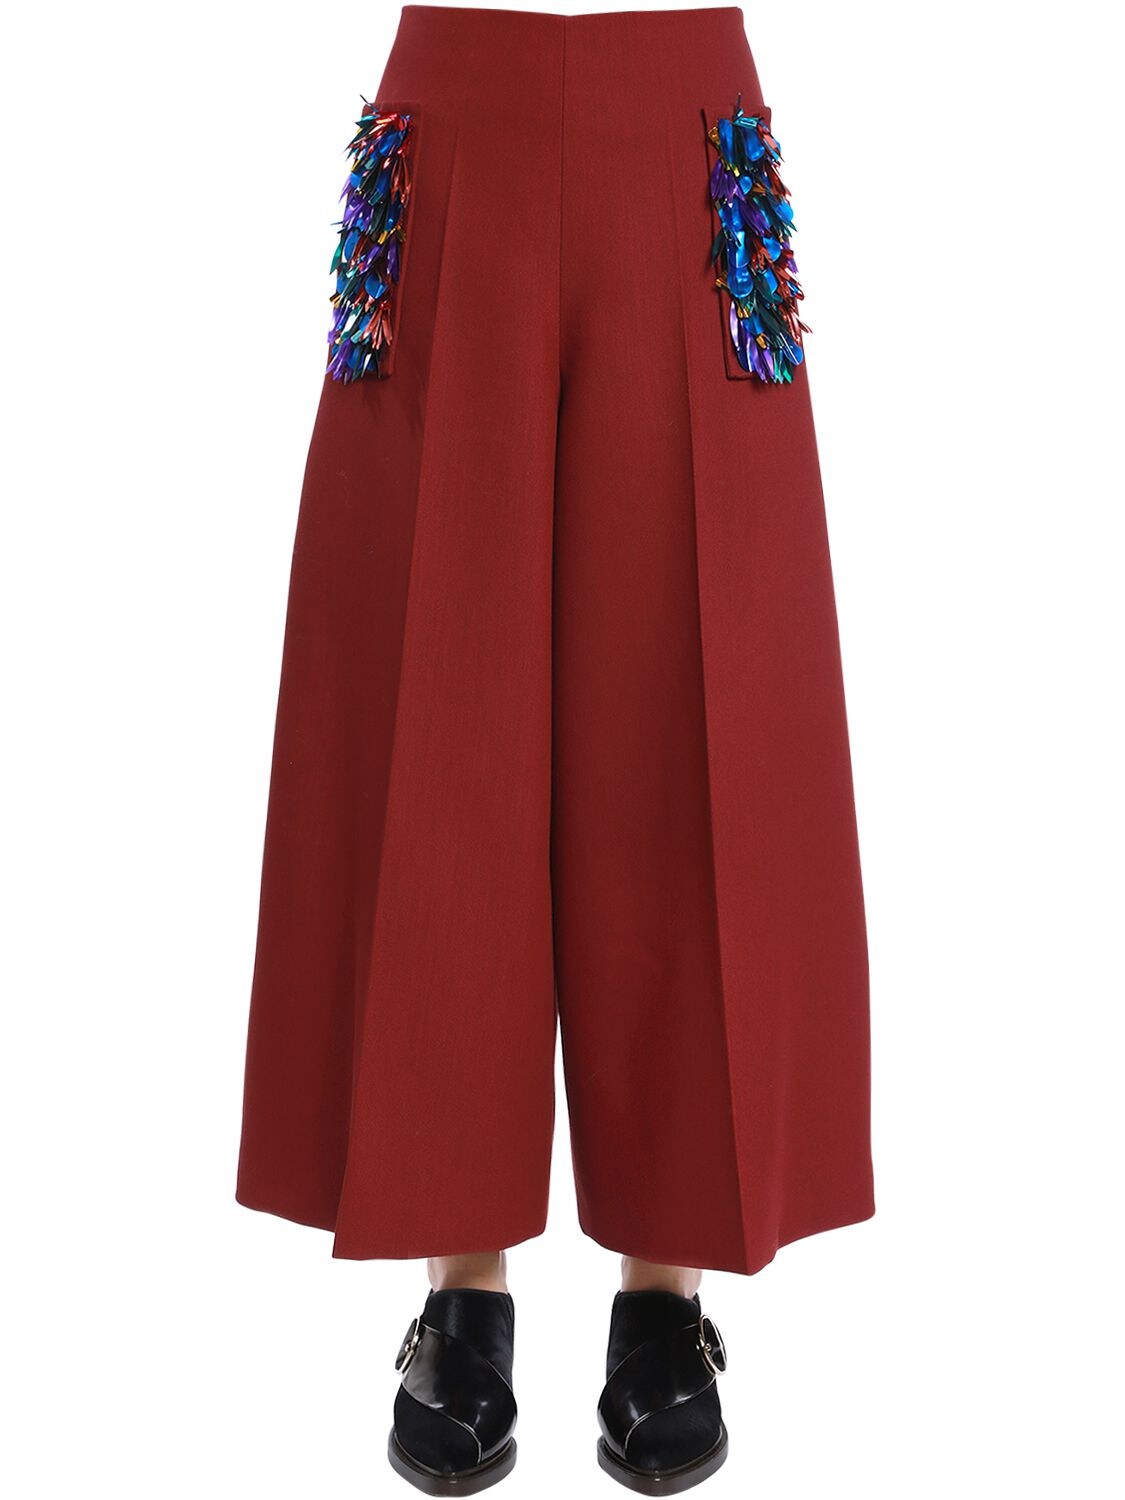 DELPOZO COOL WOOL WIDE PANTS W/ SEQUINED POCKETS,66I51G002-MZEZ0